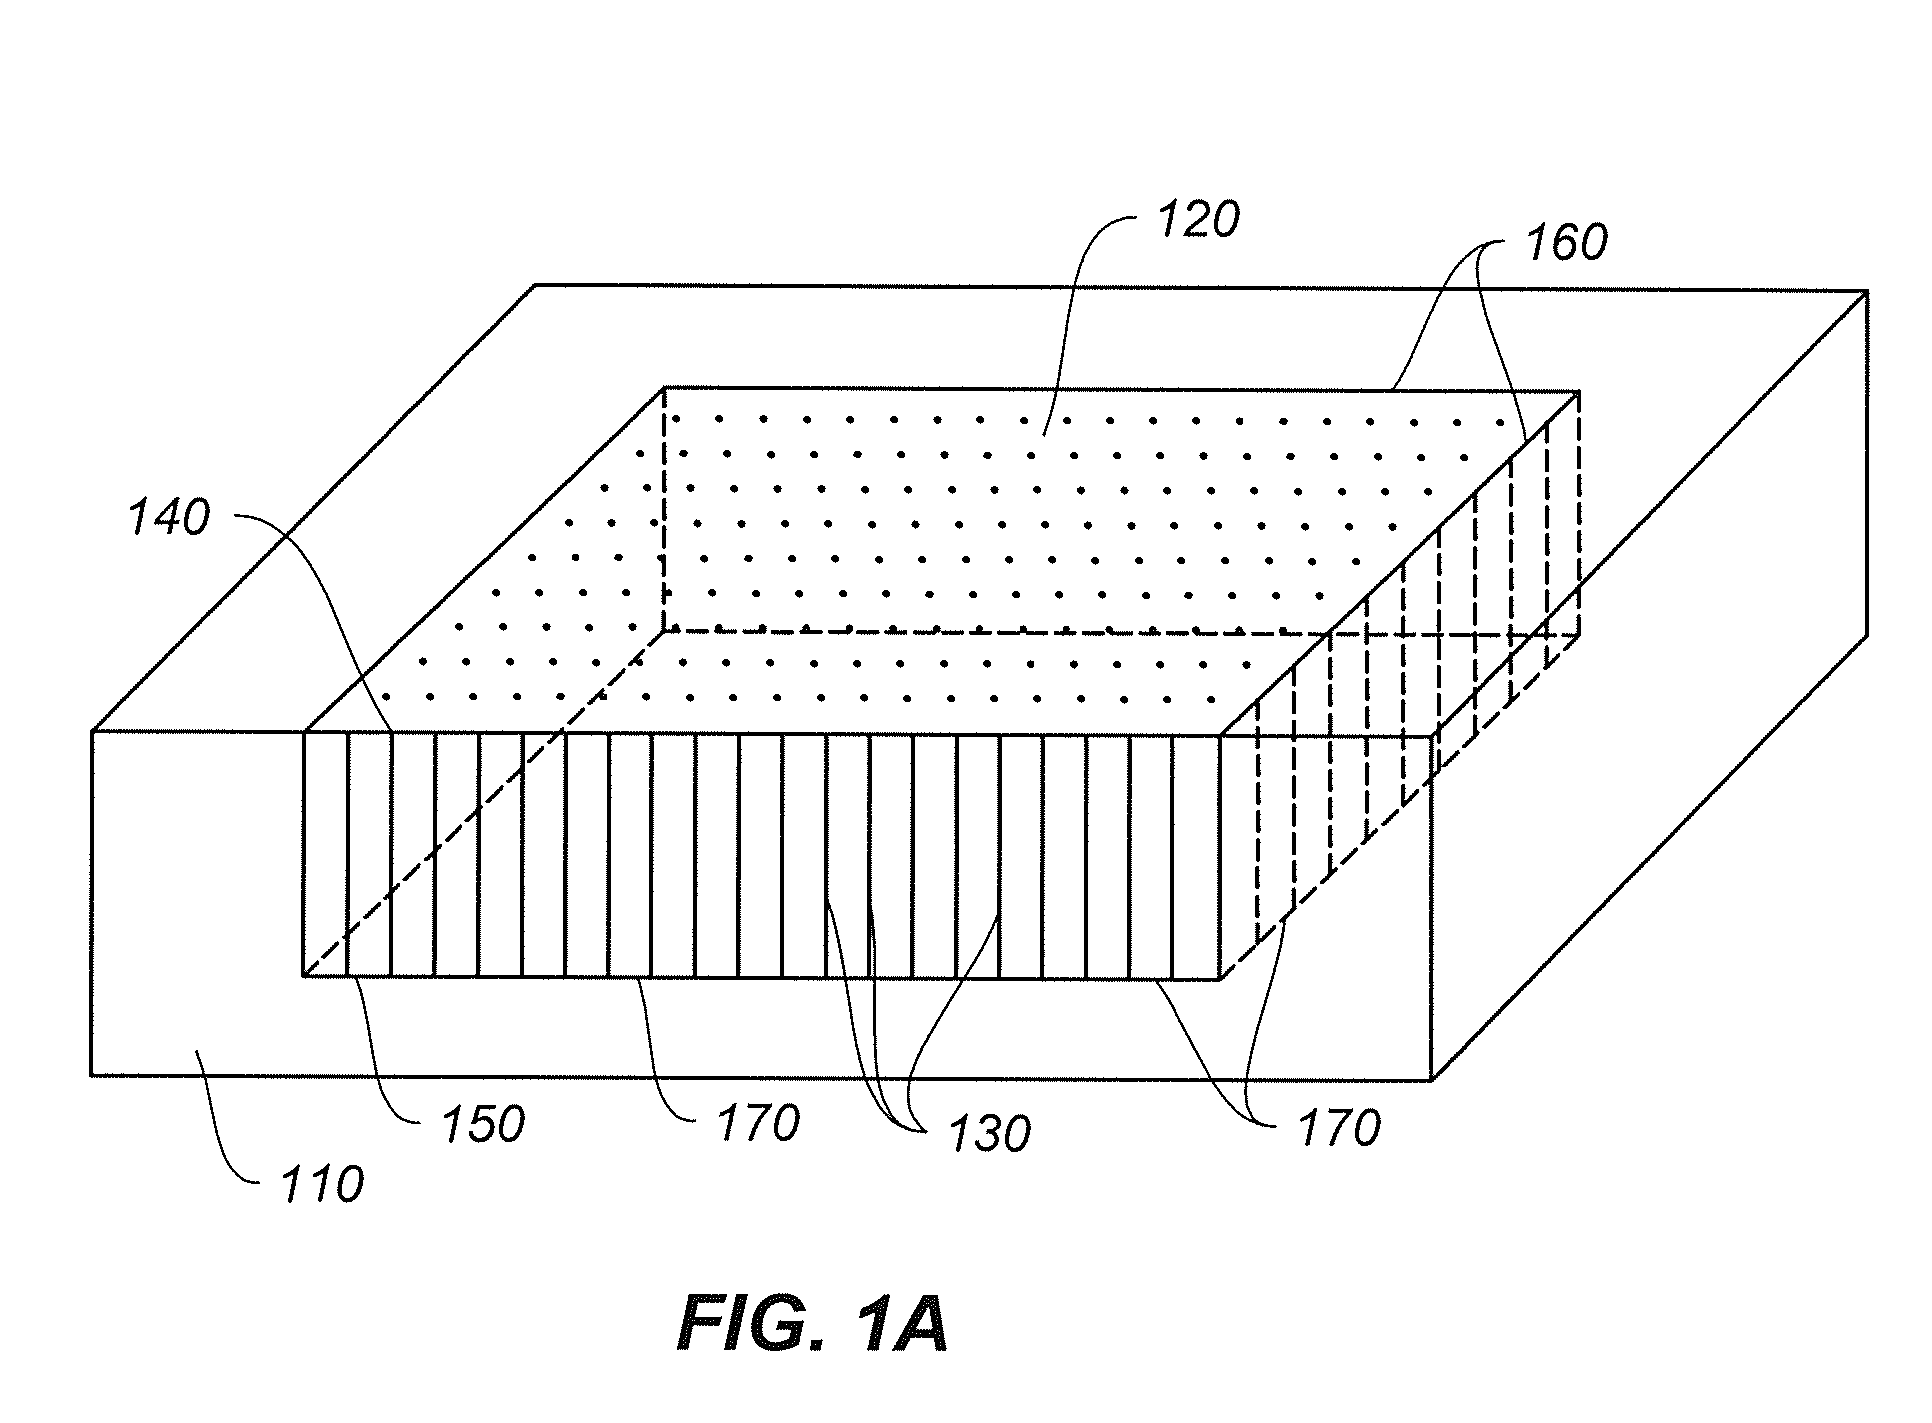 Arrays of long nanostructures in semiconductor materials and methods thereof